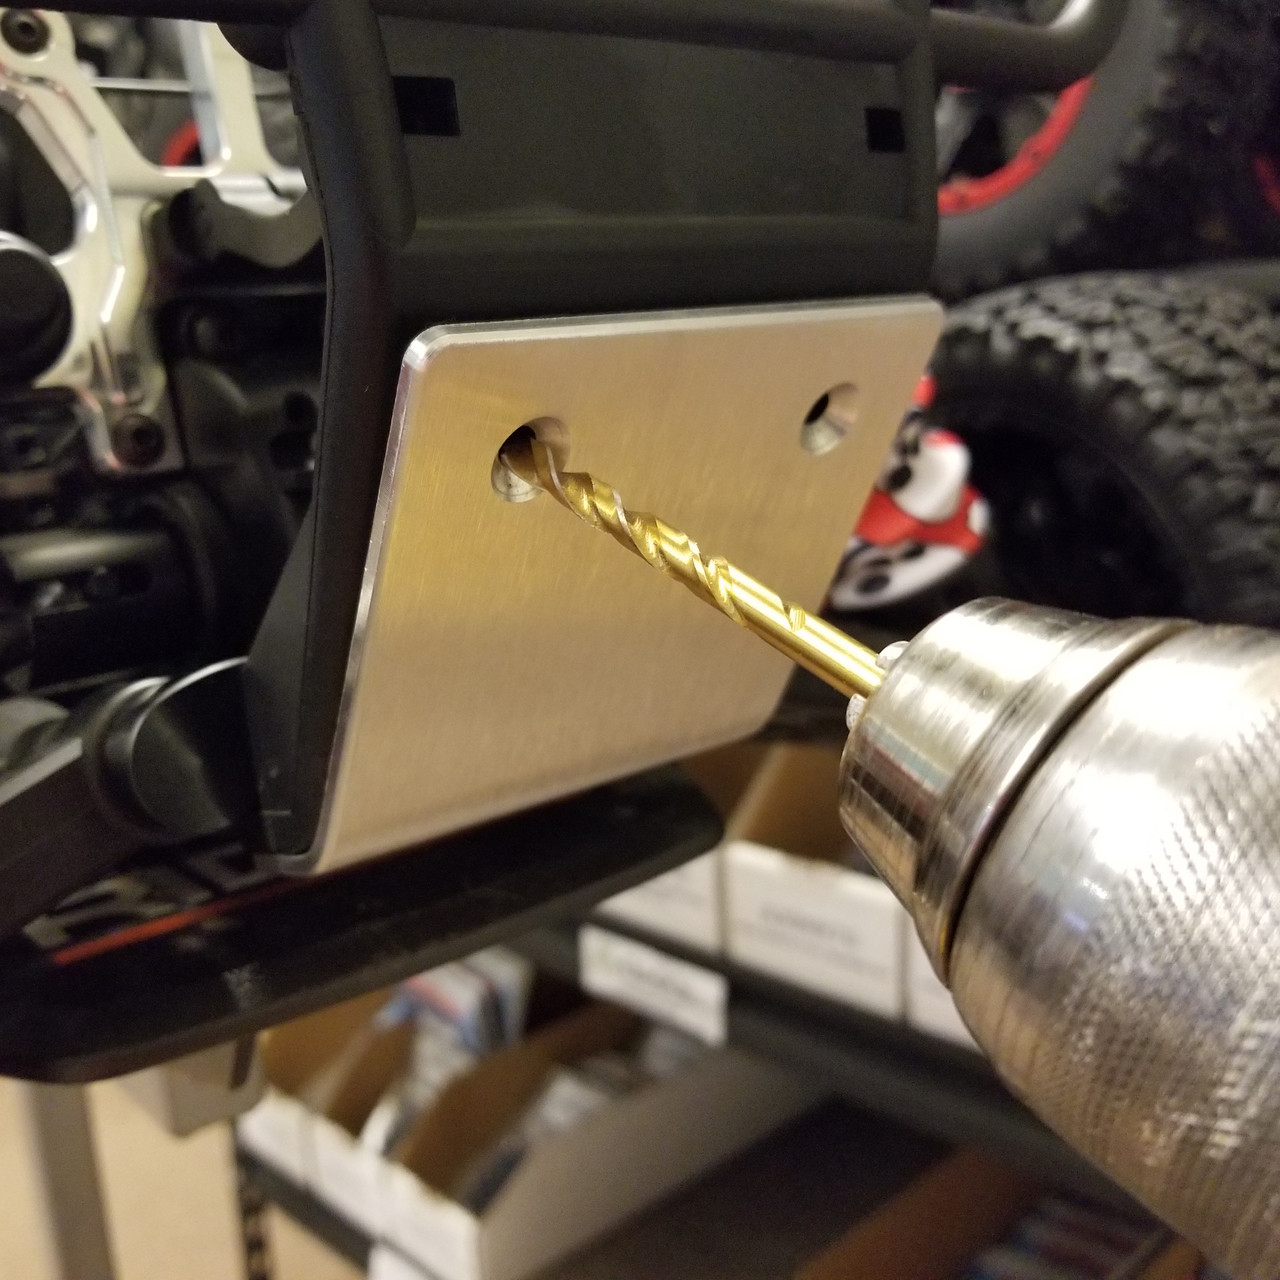 You will need to drill two holes in the plastic bumper for the install.  